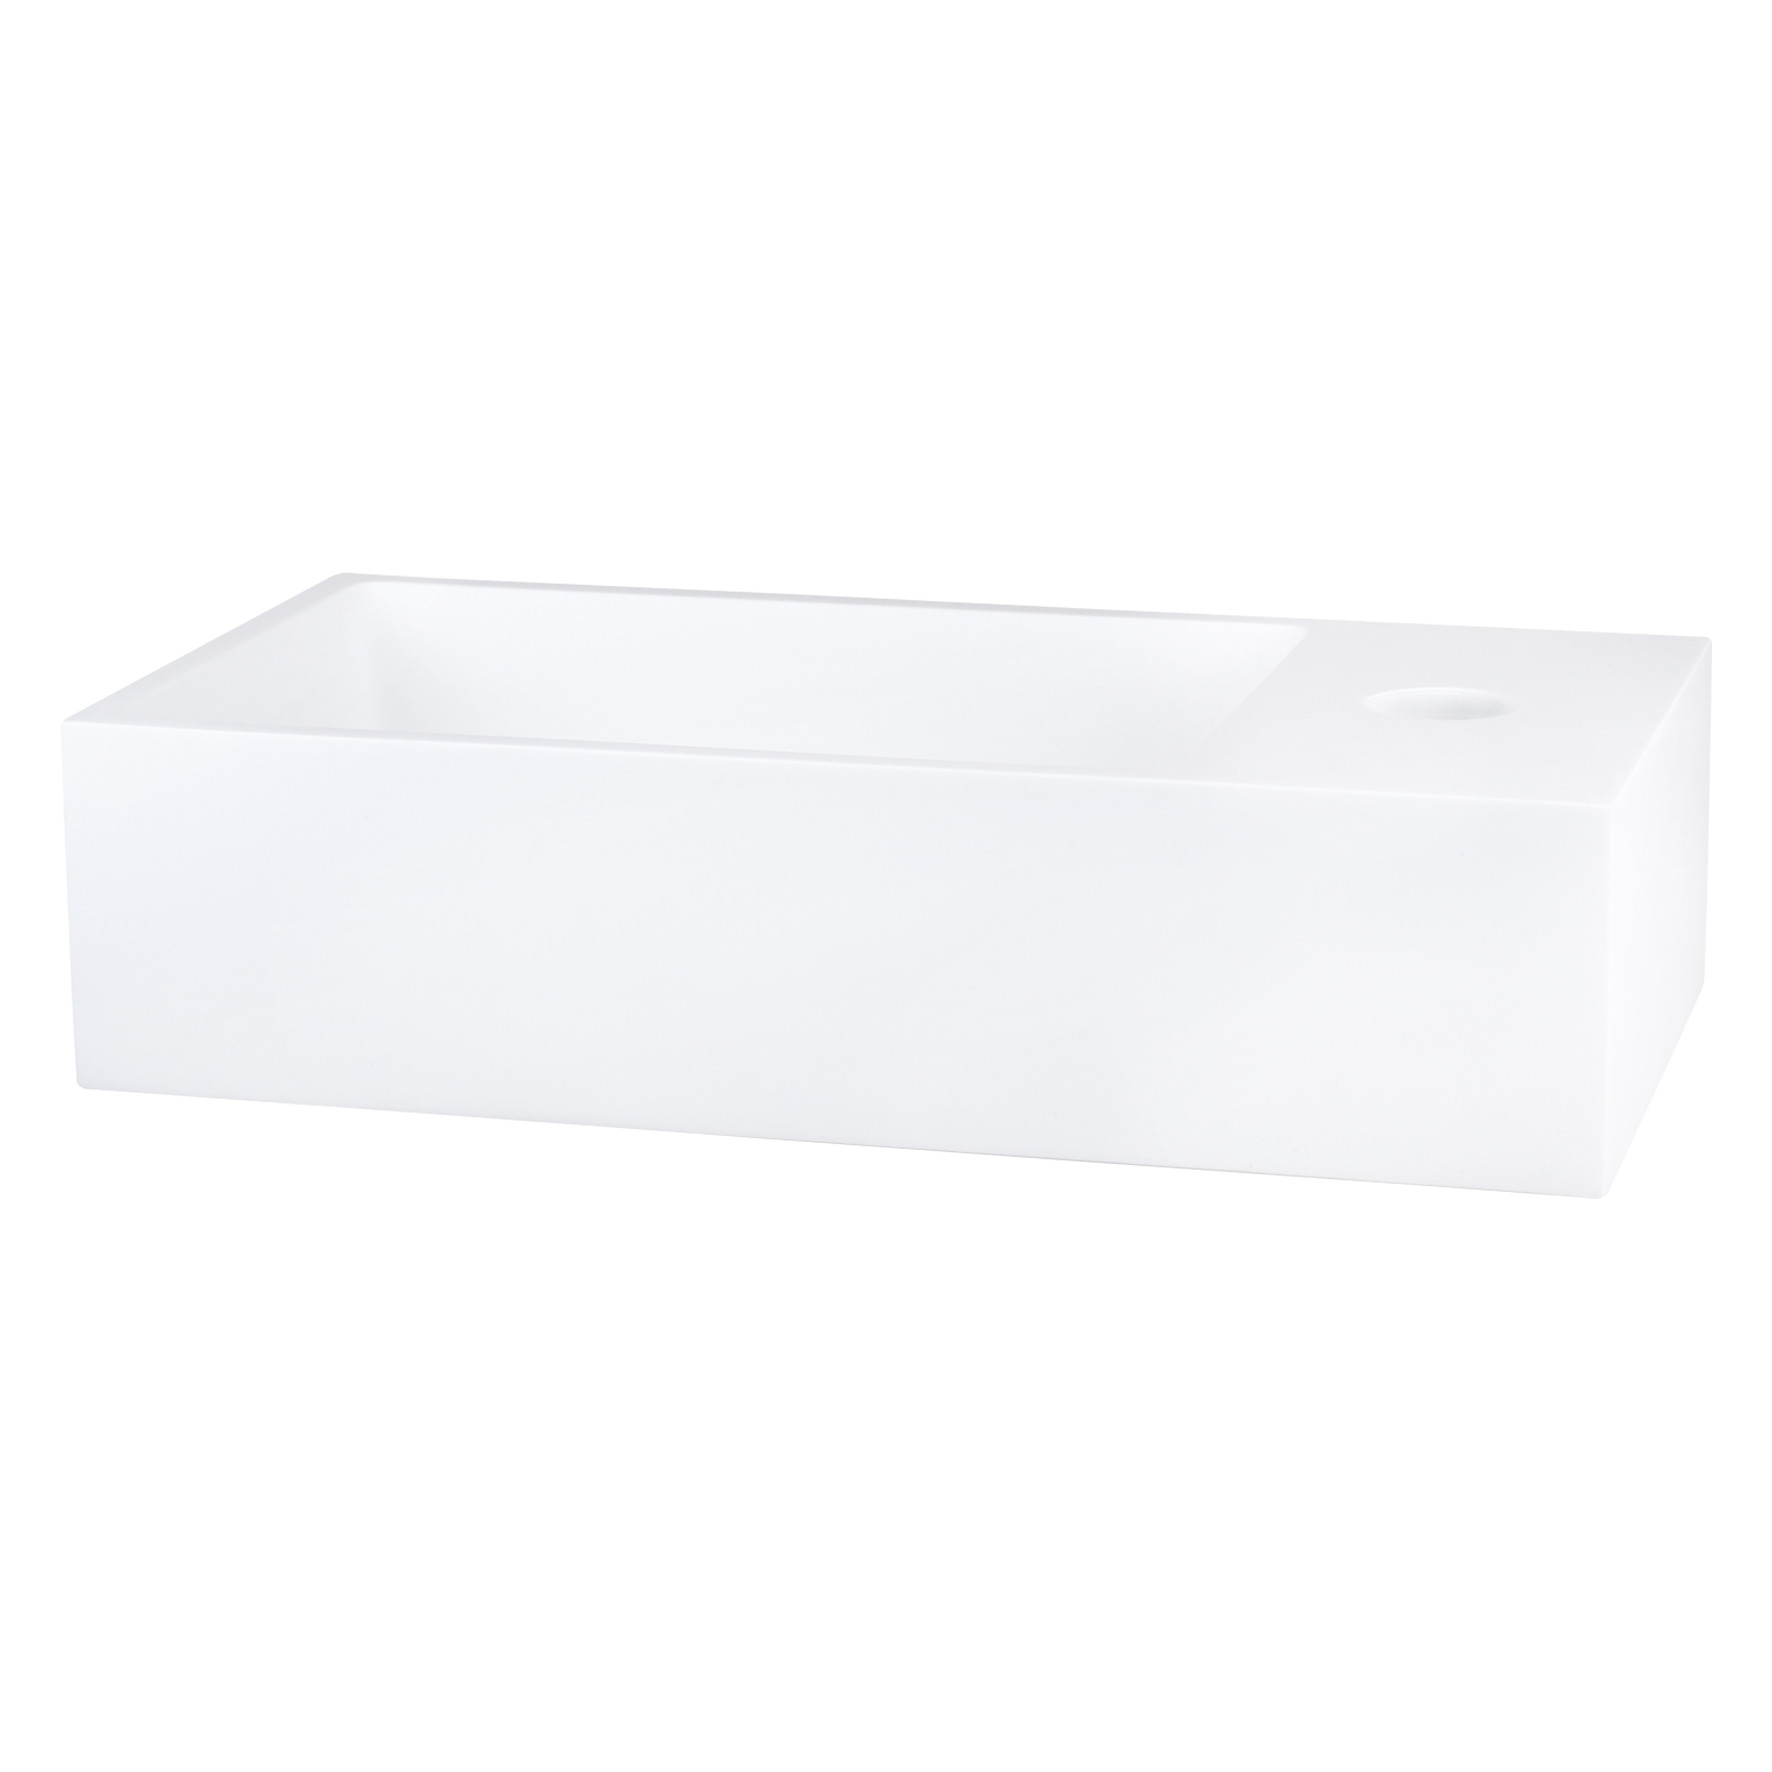 Differnz Solid fontein solid surface wit 36 x 18.5 x 9 cm